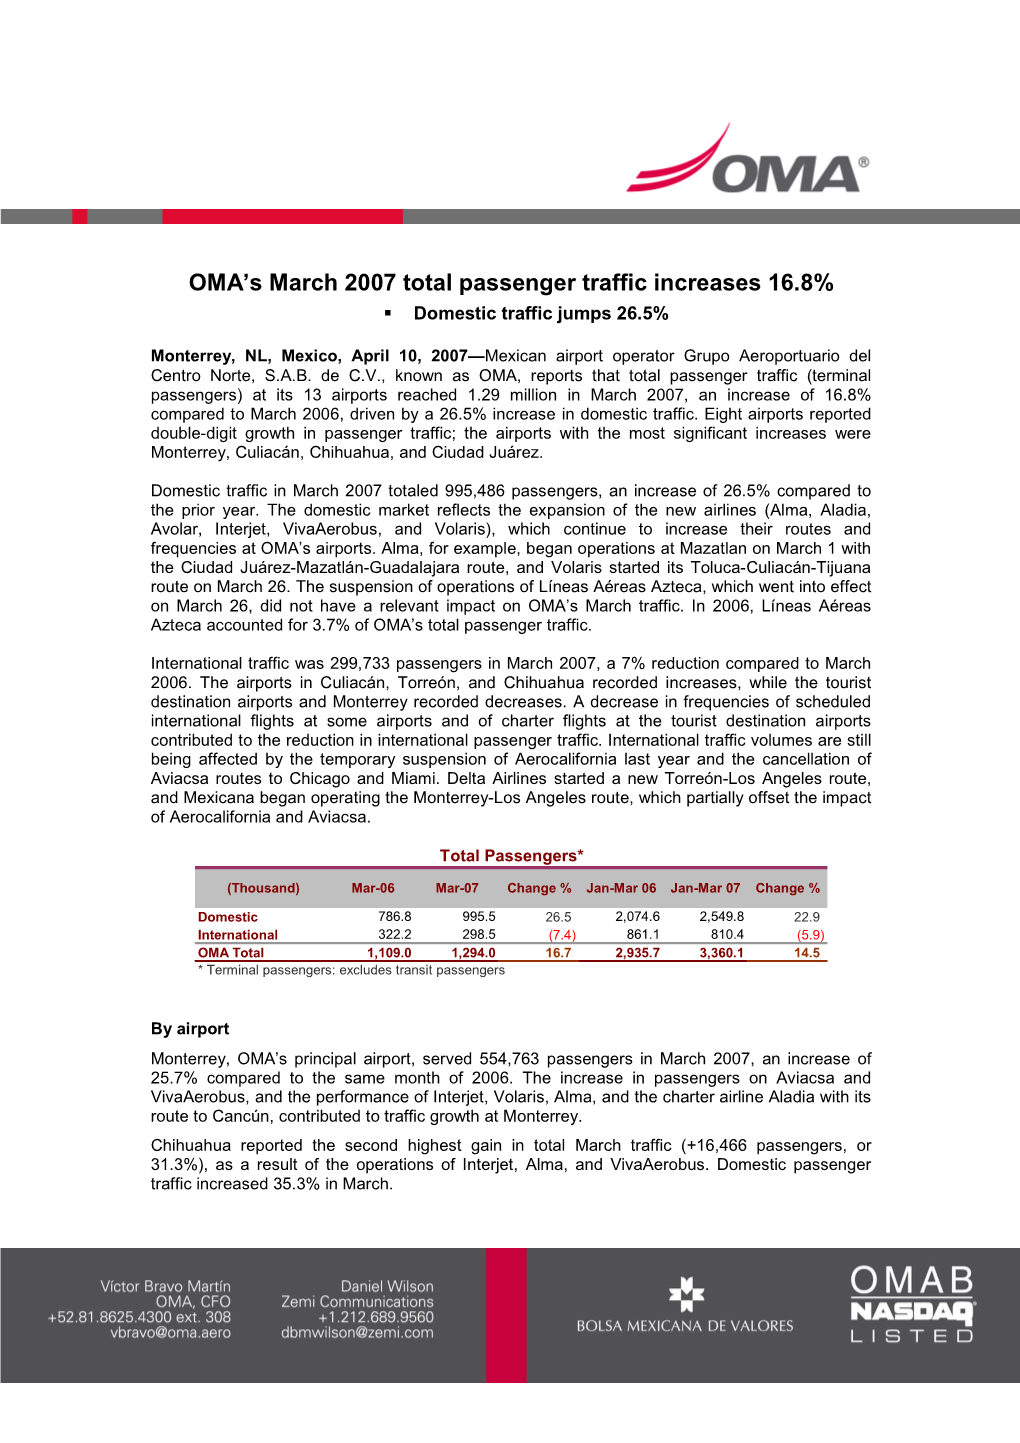 OMA's March 2007 Total Passenger Traffic Increases 16.8%